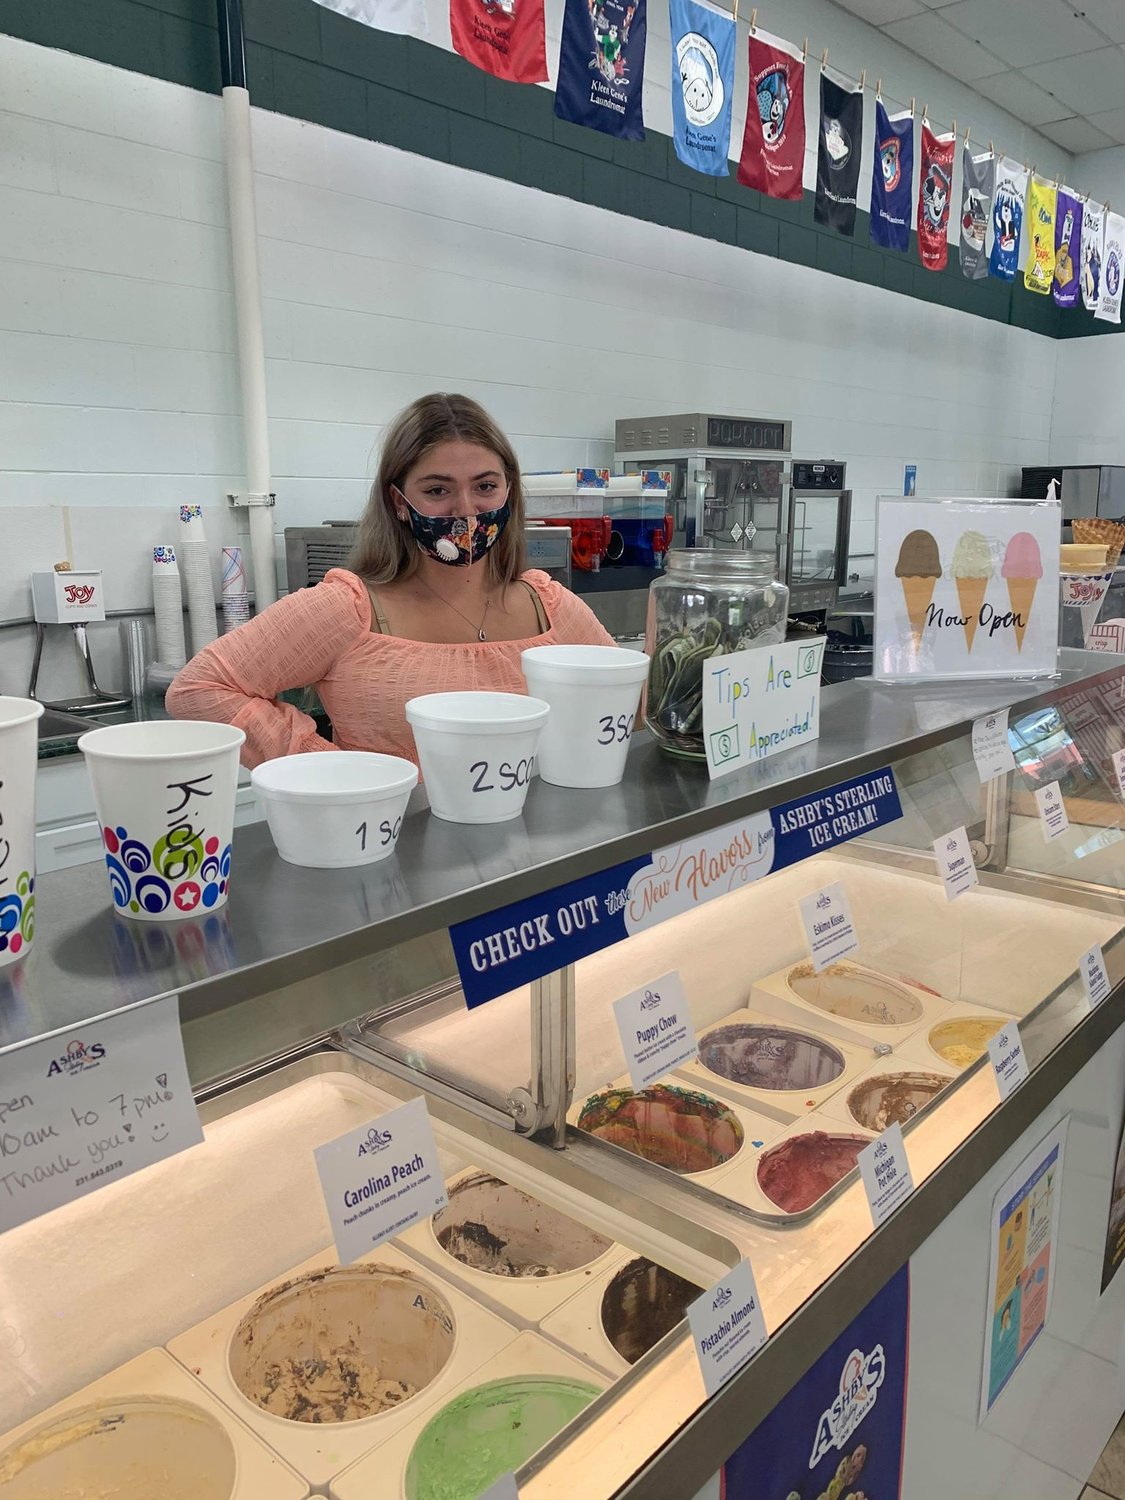 Young entrepreneur Arianna oversees the ice cream and snack bar at her family’s newly acquired business, Kleen Gene’s Laundromat in Harrison.